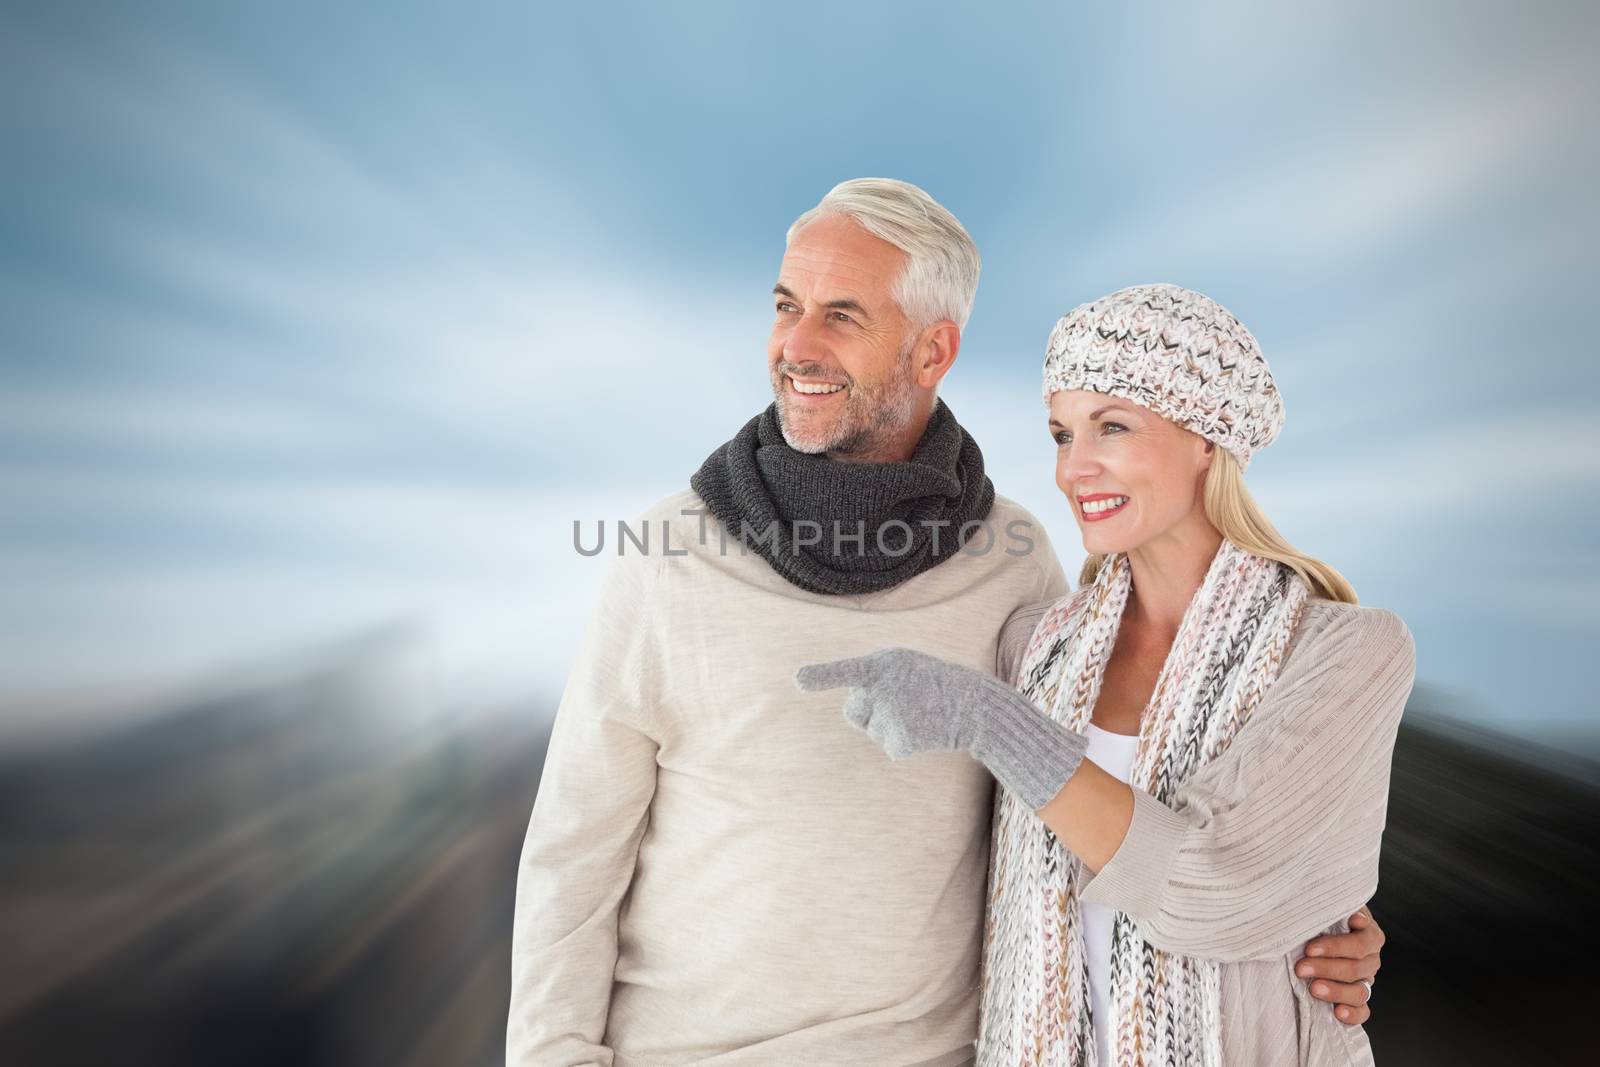 Happy couple in winter fashion looking against large rock overlooking big city